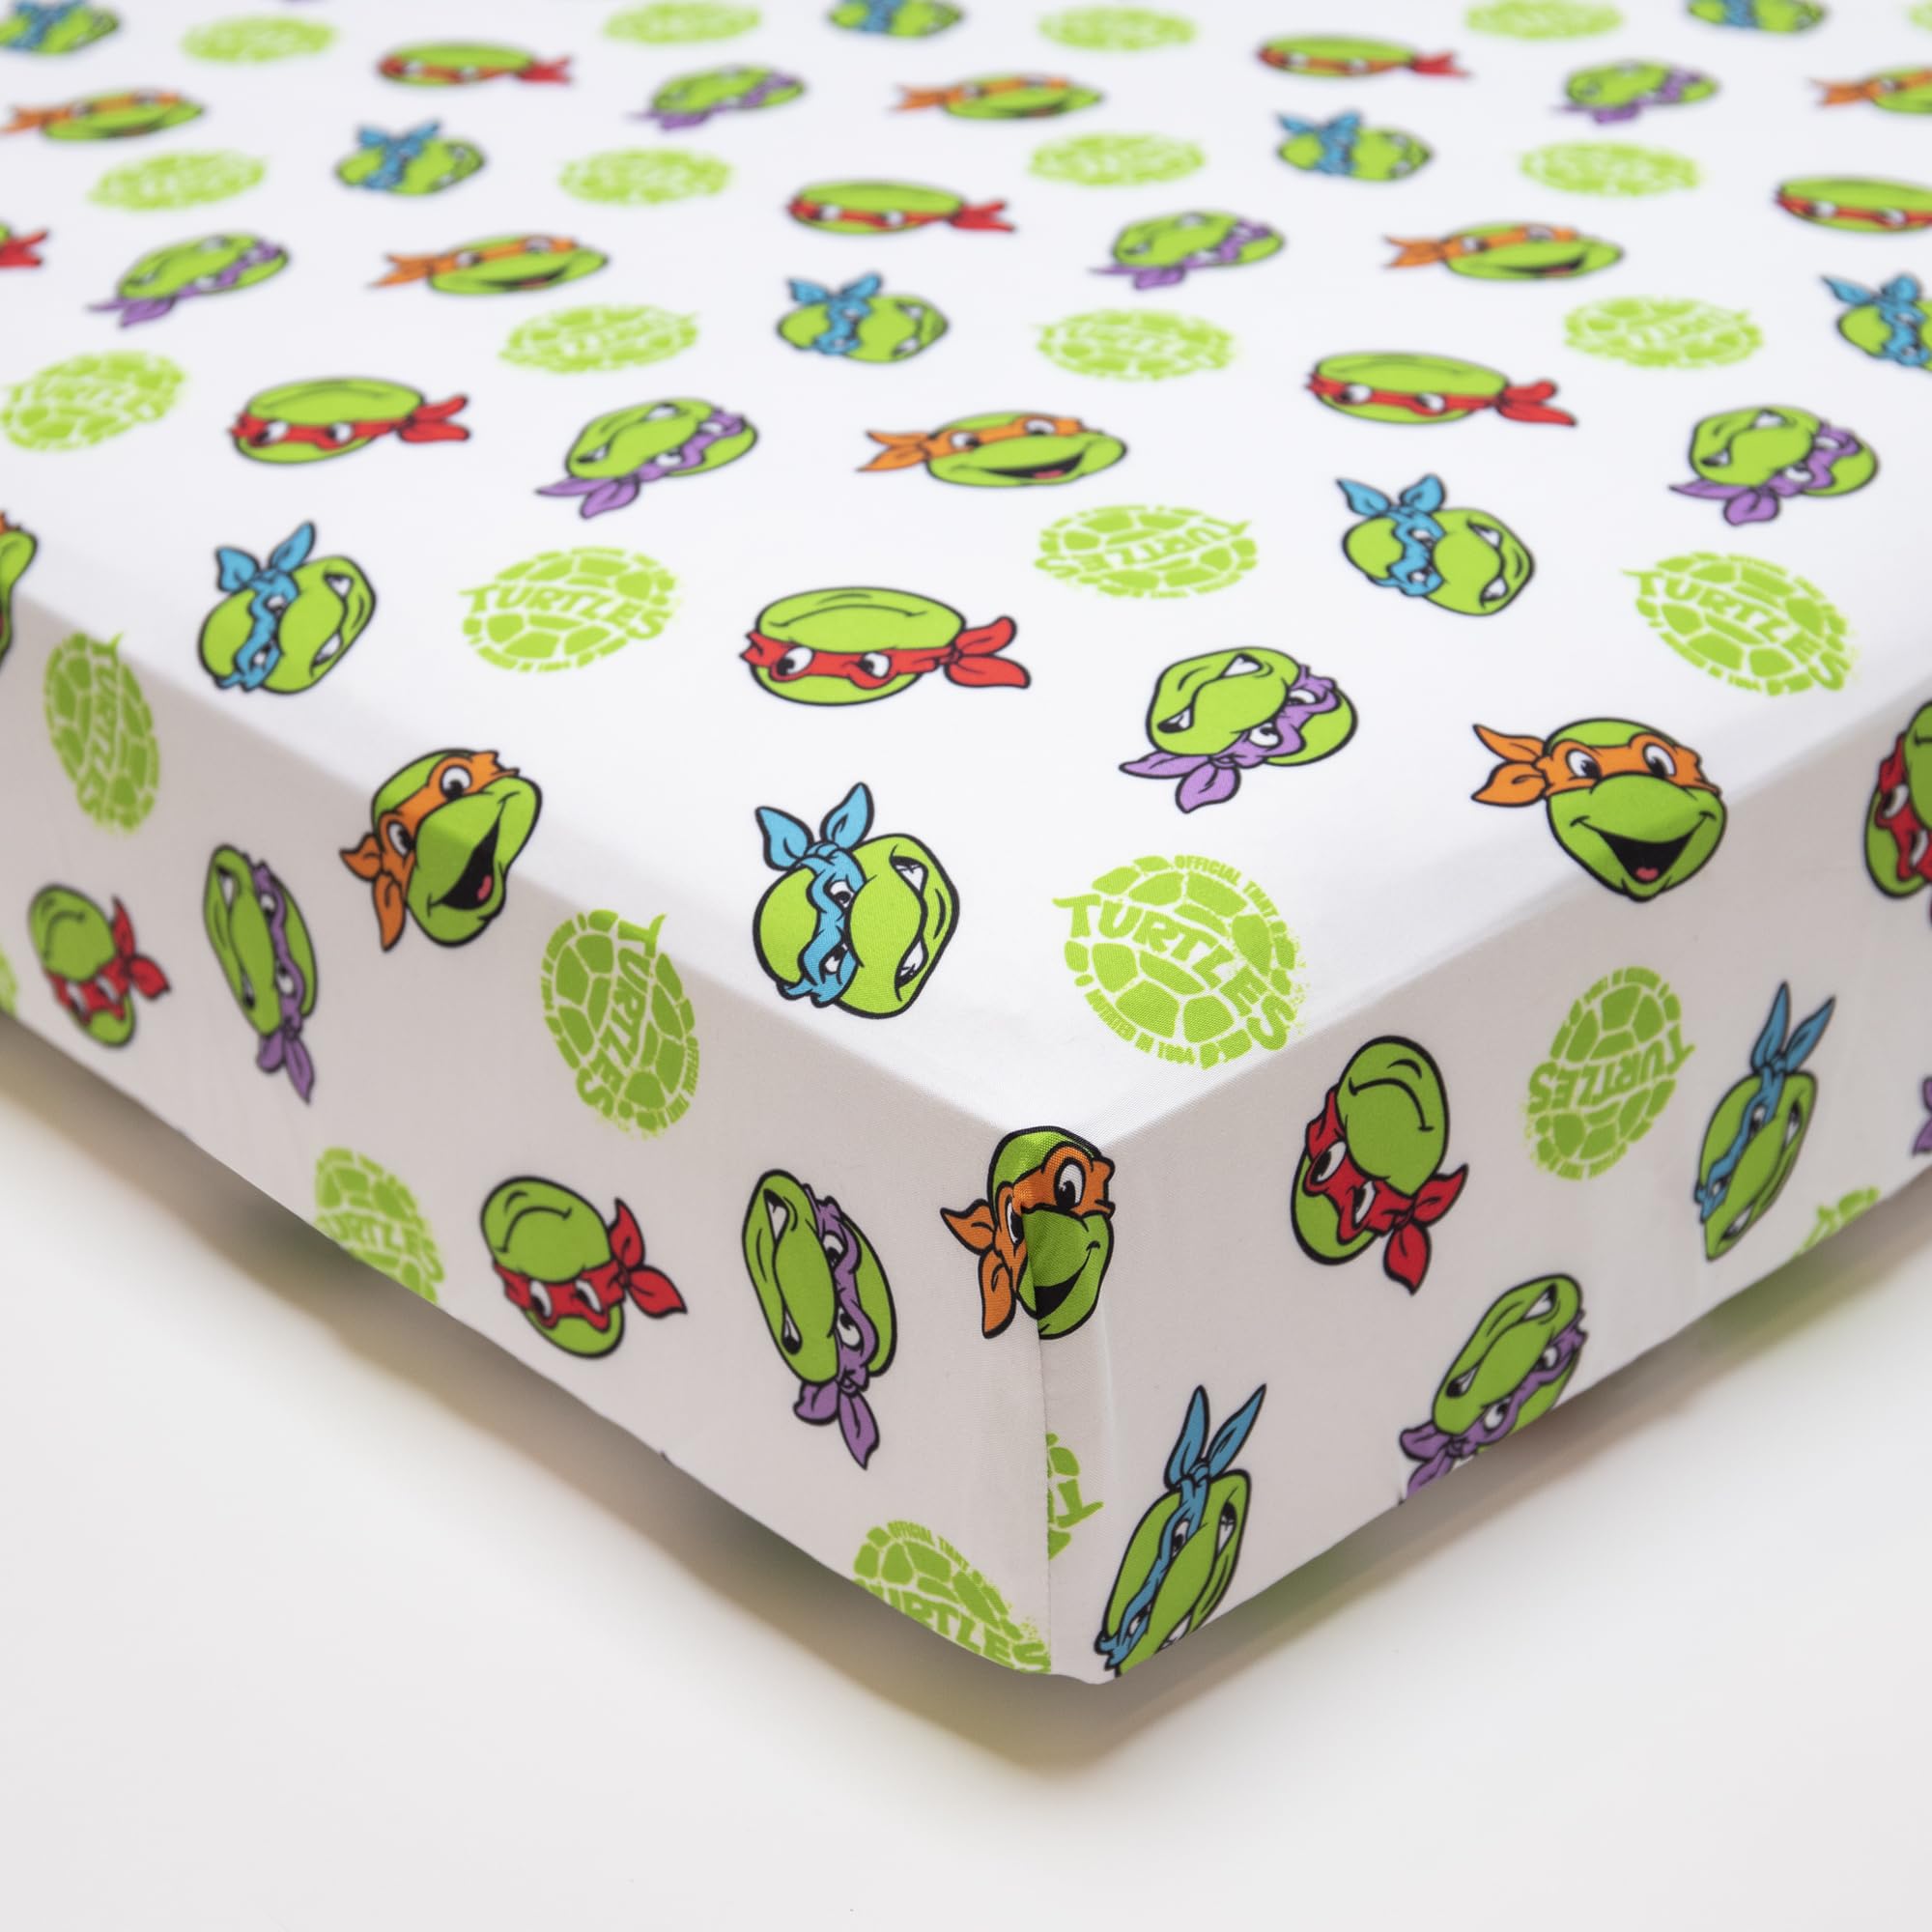 Teenage Mutant Ninja Turtles 4 Piece Toddler Bedding Set – Includes Comforter, Sheet Set – Fitted + Top Sheet + Reversible Pillowcase for Boys Bed, Blue